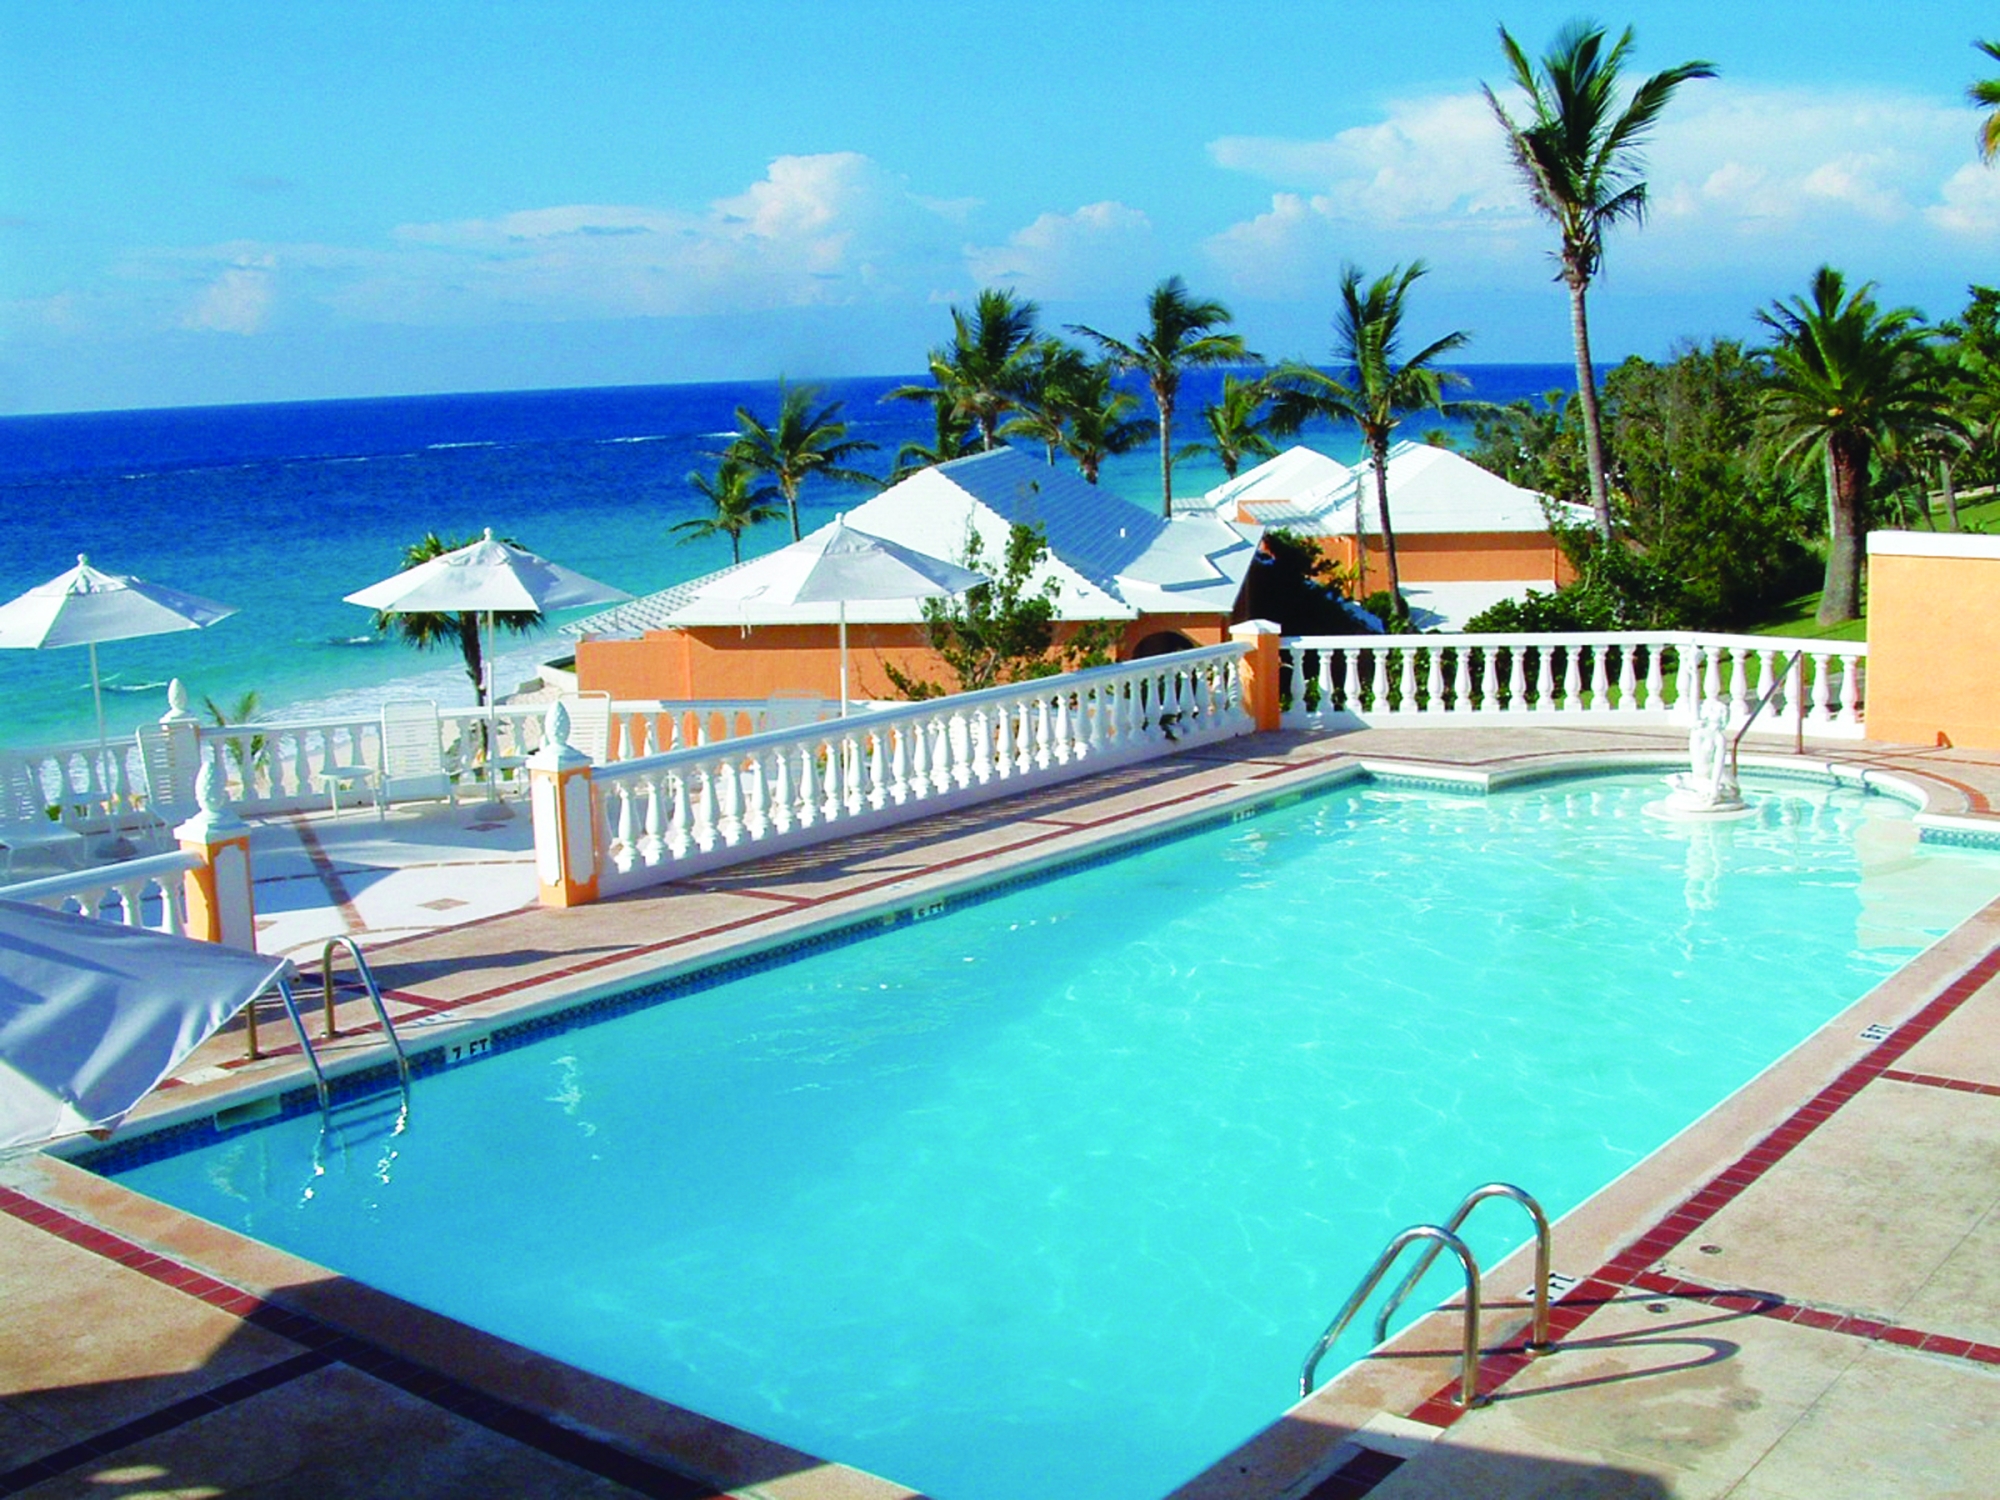 30% Off Cyber Sale at Coco Reef Resort – Coco Reef Pool